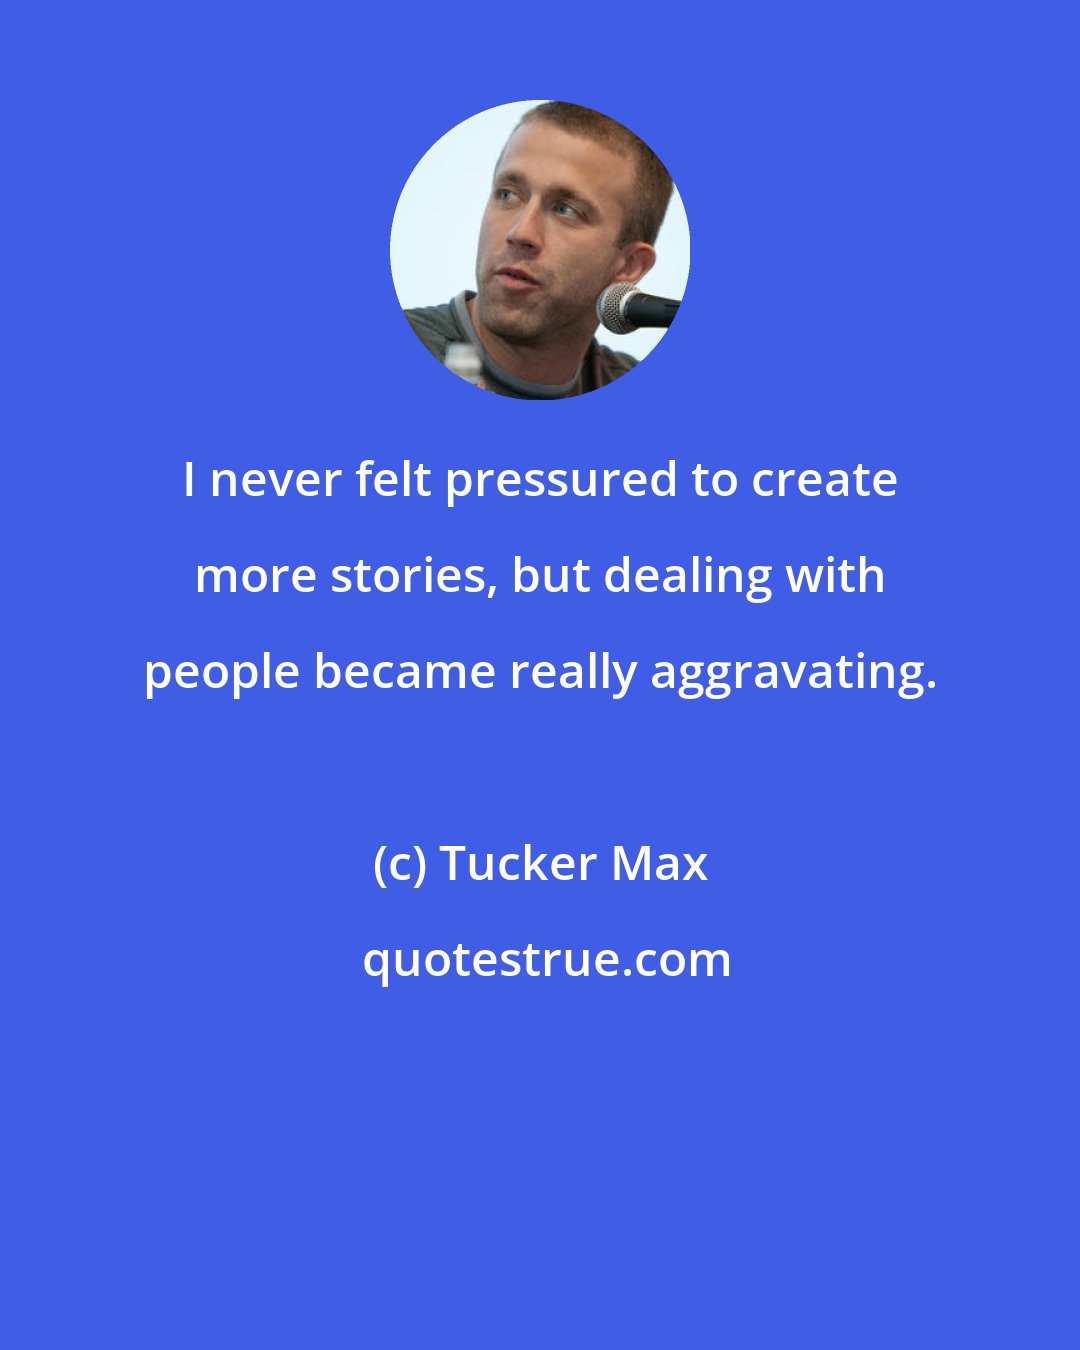 Tucker Max: I never felt pressured to create more stories, but dealing with people became really aggravating.